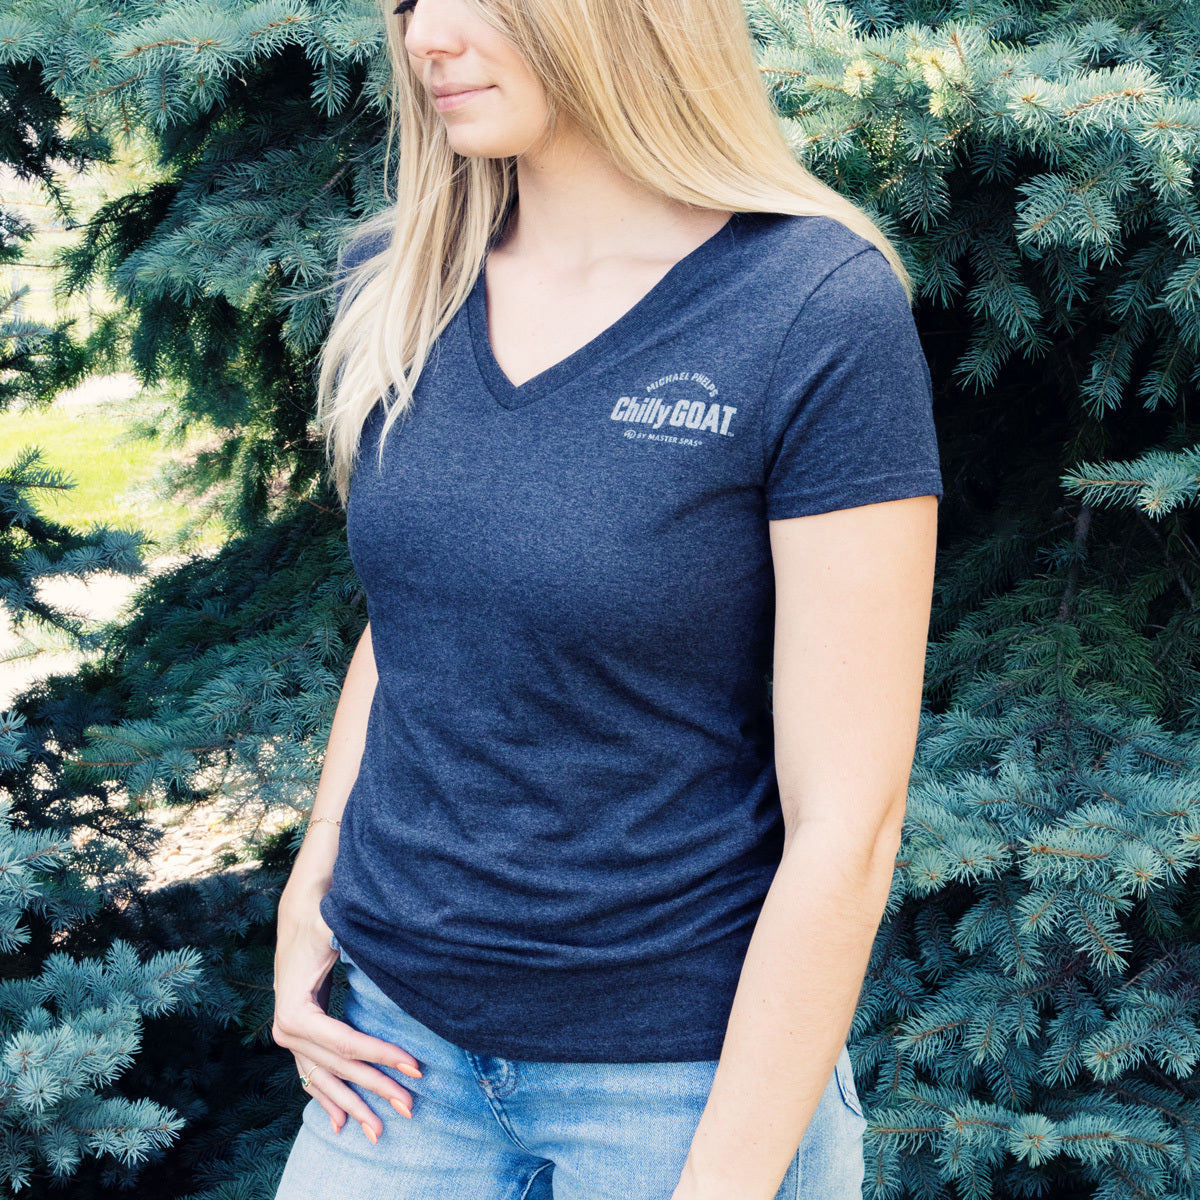 Chilly GOAT Women's Tee